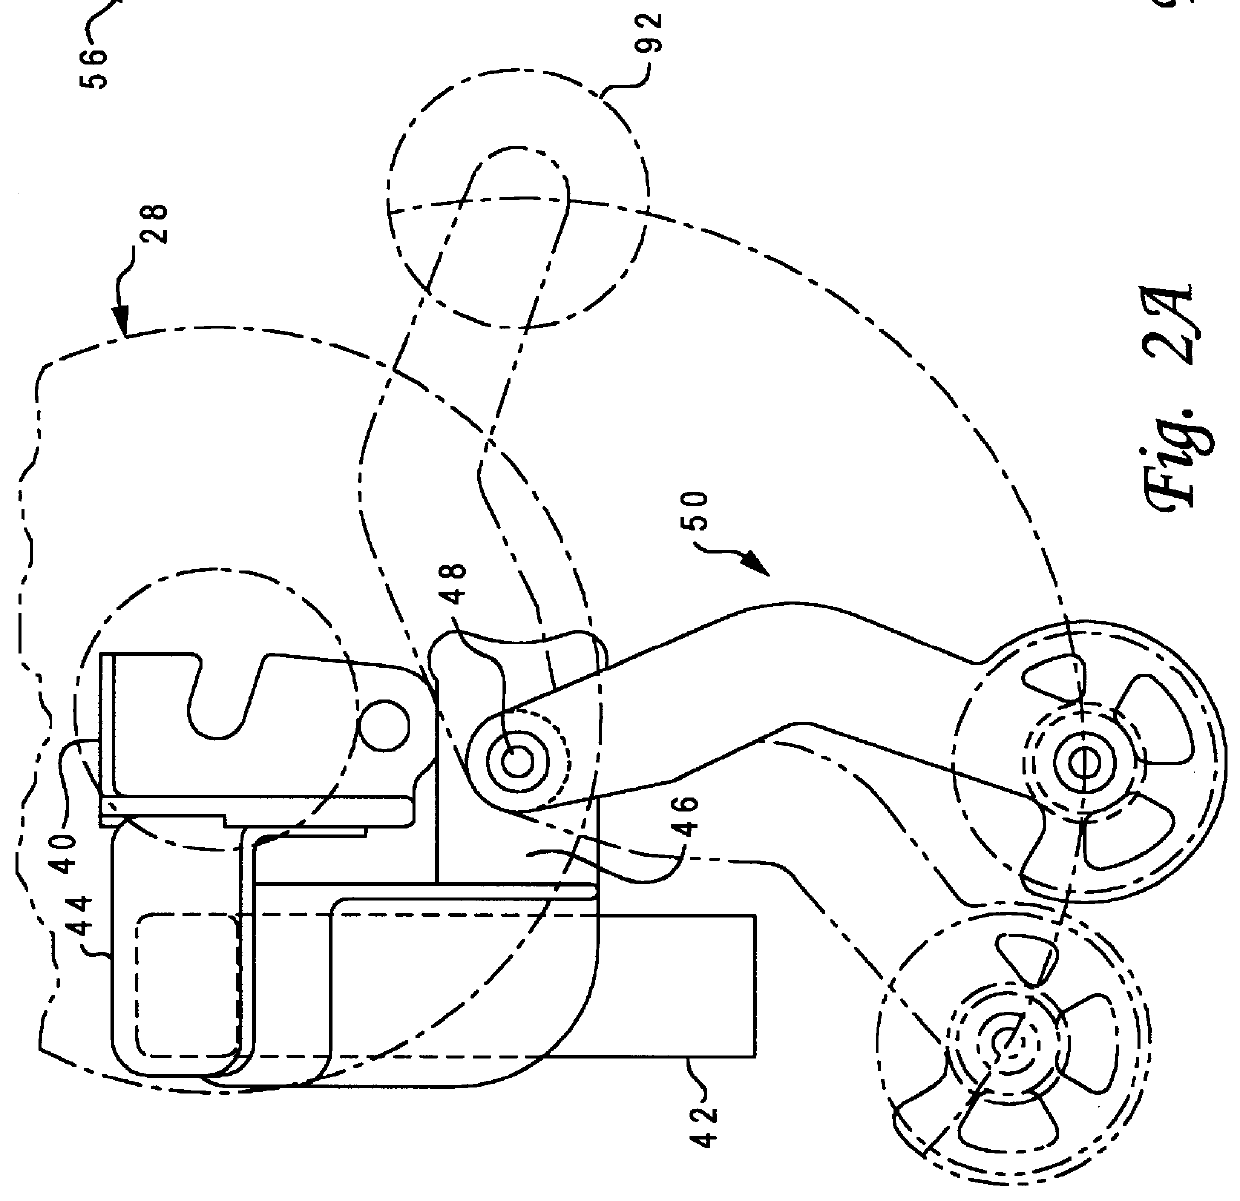 Hydraulically-operated bicycle shifting system with positive pressure actuation